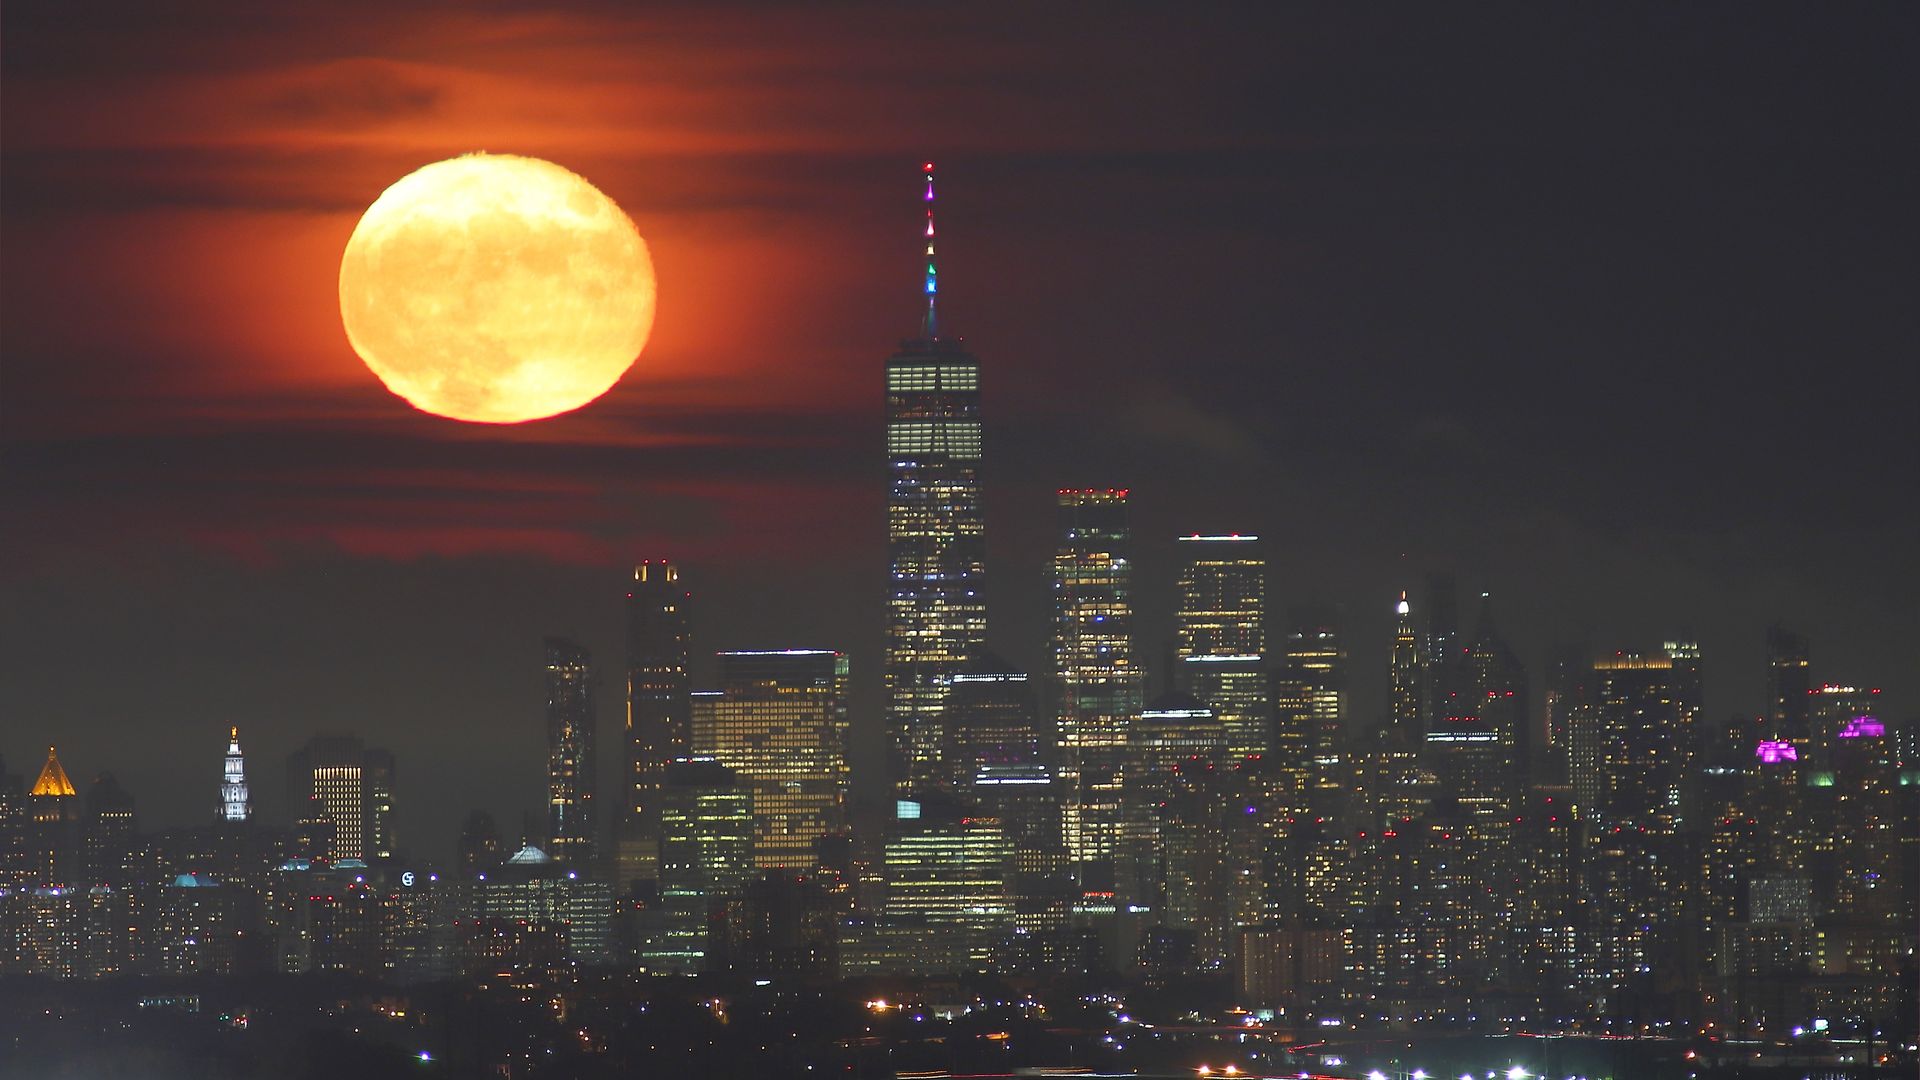 Strawberry Moon from 2021 over lower Manhattan in New York City